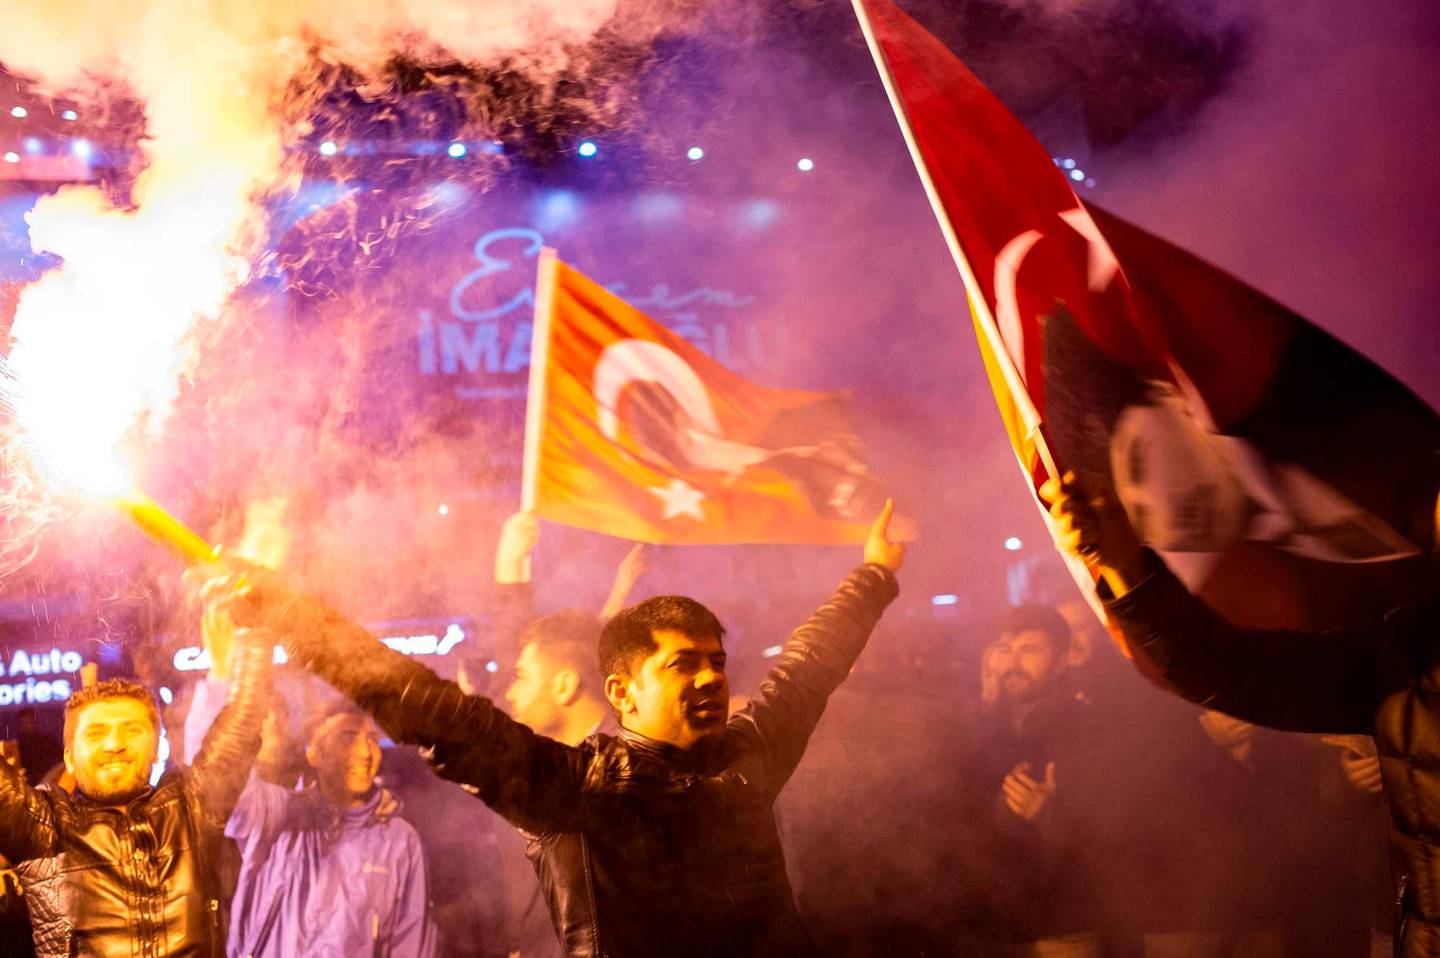 Supporters of the main opposition Republican People's Party (CHP) wave flags and light up torches to celebrate the local election in Istanbul, Turkey on 1 April 2019. (Photo by Yasin AKGUL / AFP)